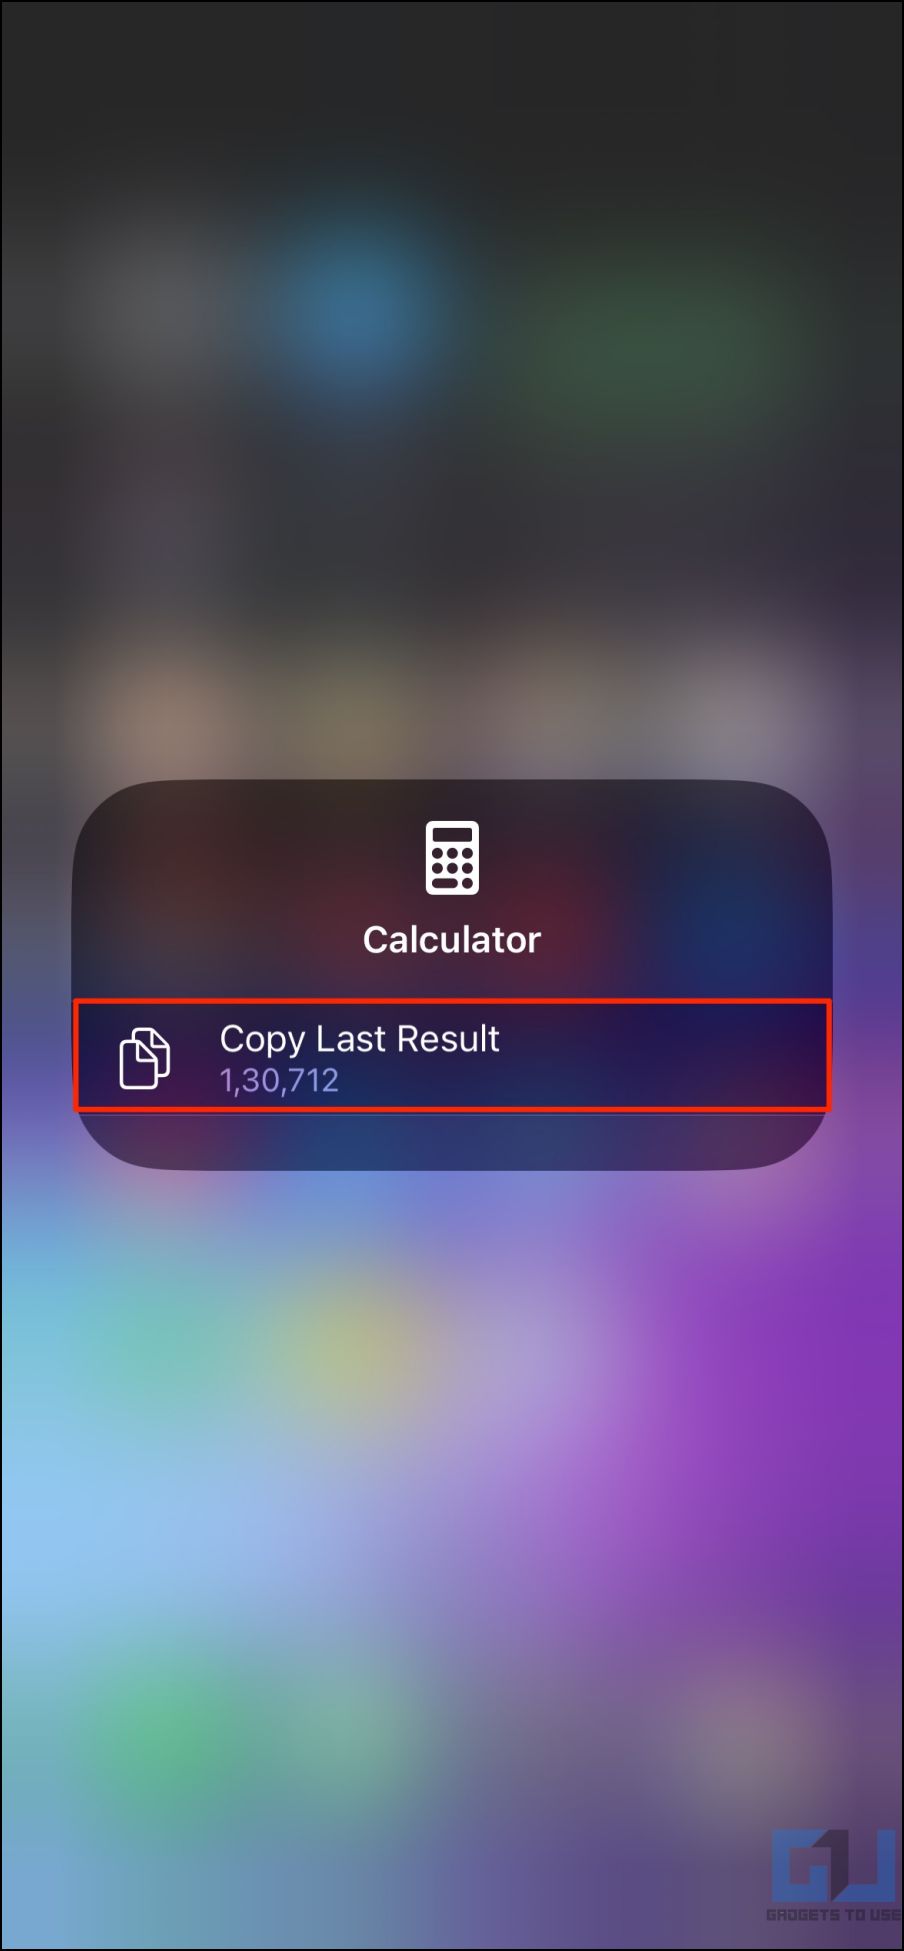 Check Calculator History on iPhone